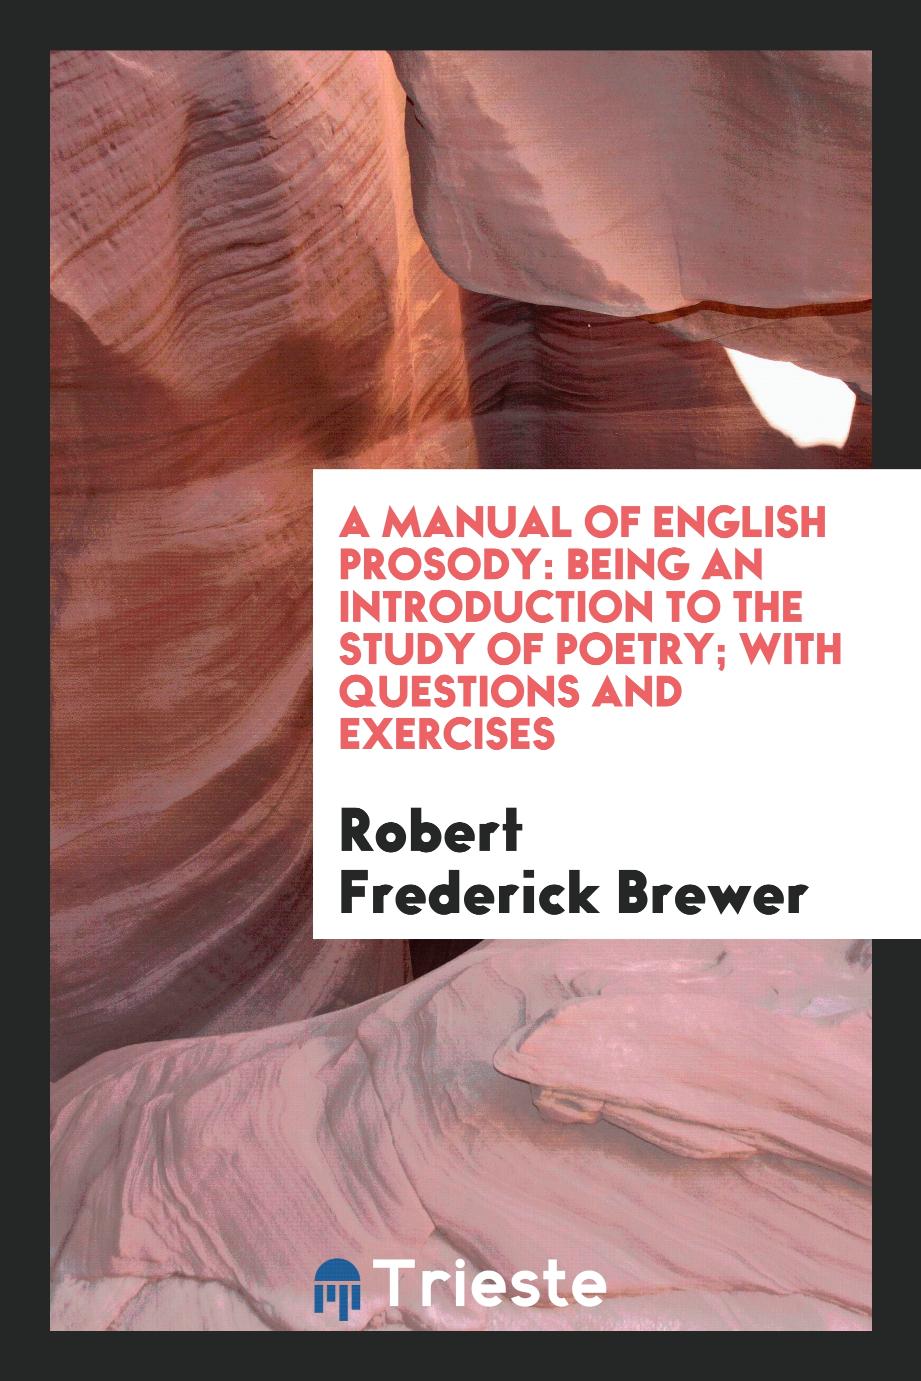 A Manual of English Prosody: Being an Introduction to the Study of Poetry; With Questions and Exercises